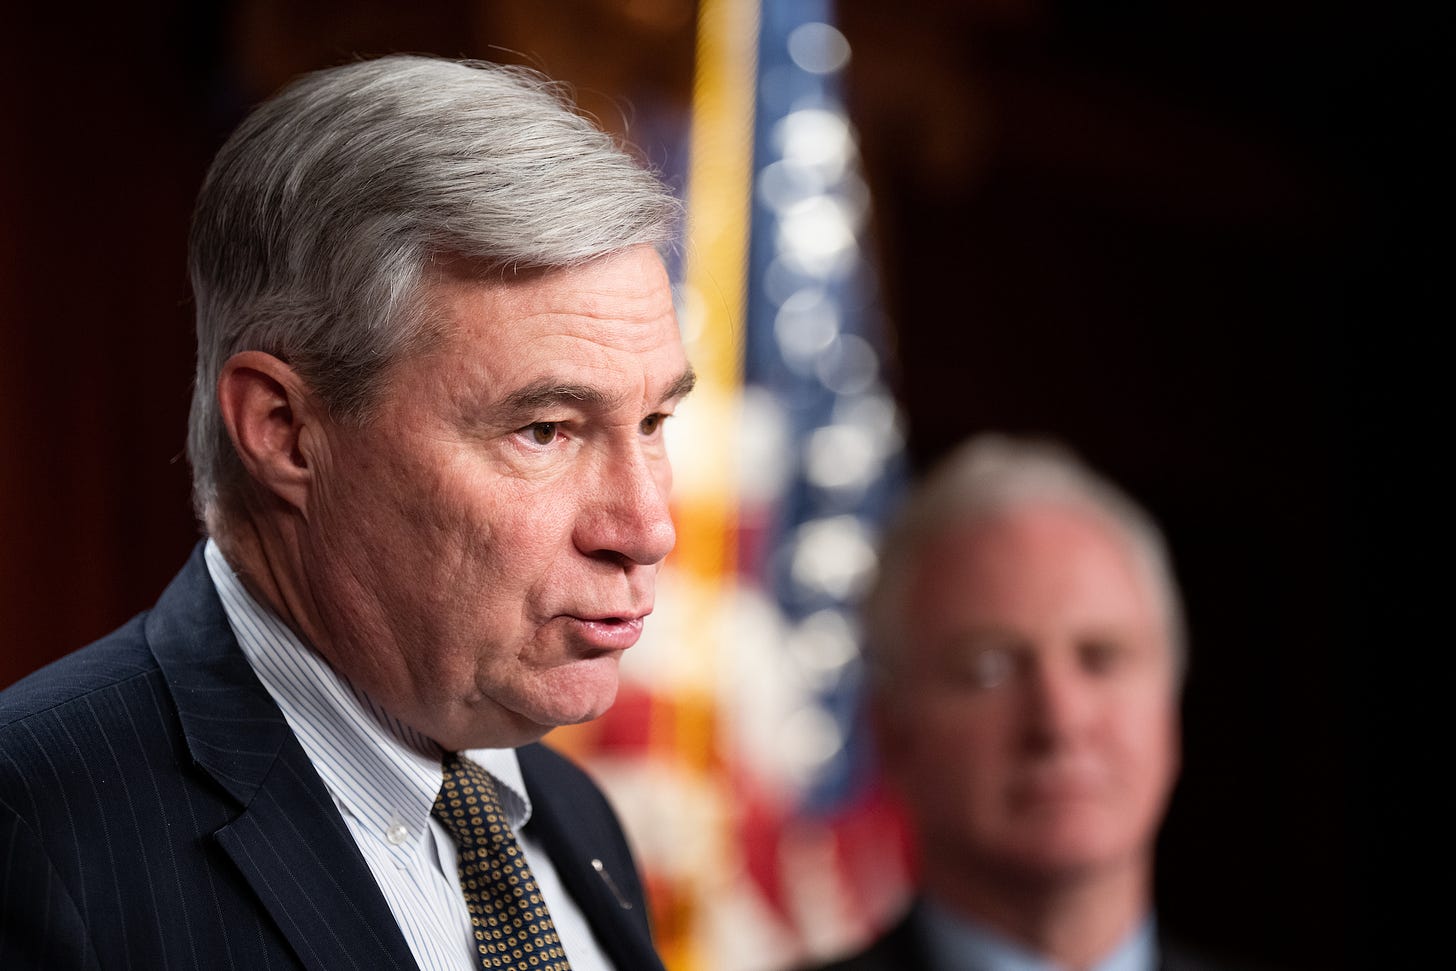 Sen. Sheldon Whitehouse, D-R.I., said he hopes the regulation considers the &quot;terrible social cost of carbon emissions.&quot; (Bill Clark/CQ Roll Call file photo)